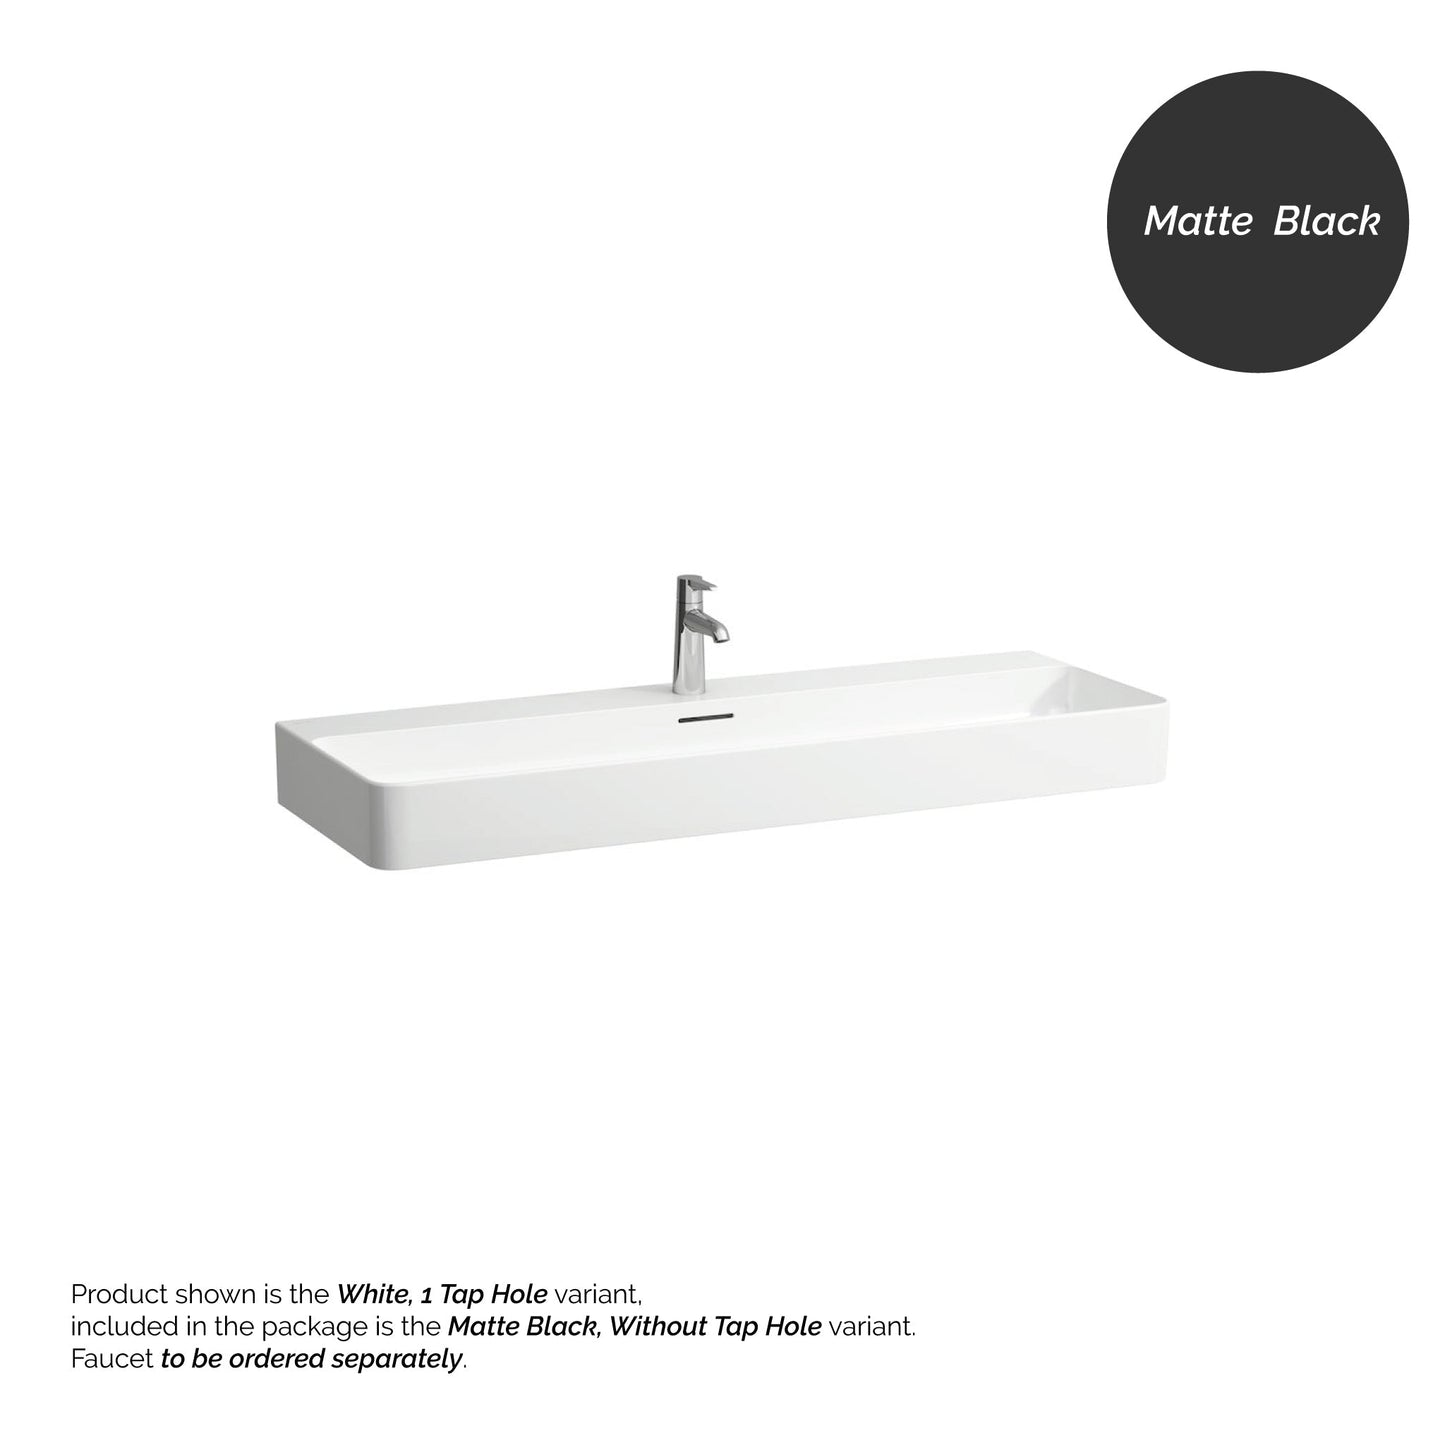 Laufen Val 47" x 17" Matte Black Ceramic Wall-Mounted Bathroom Sink Without Faucet Hole